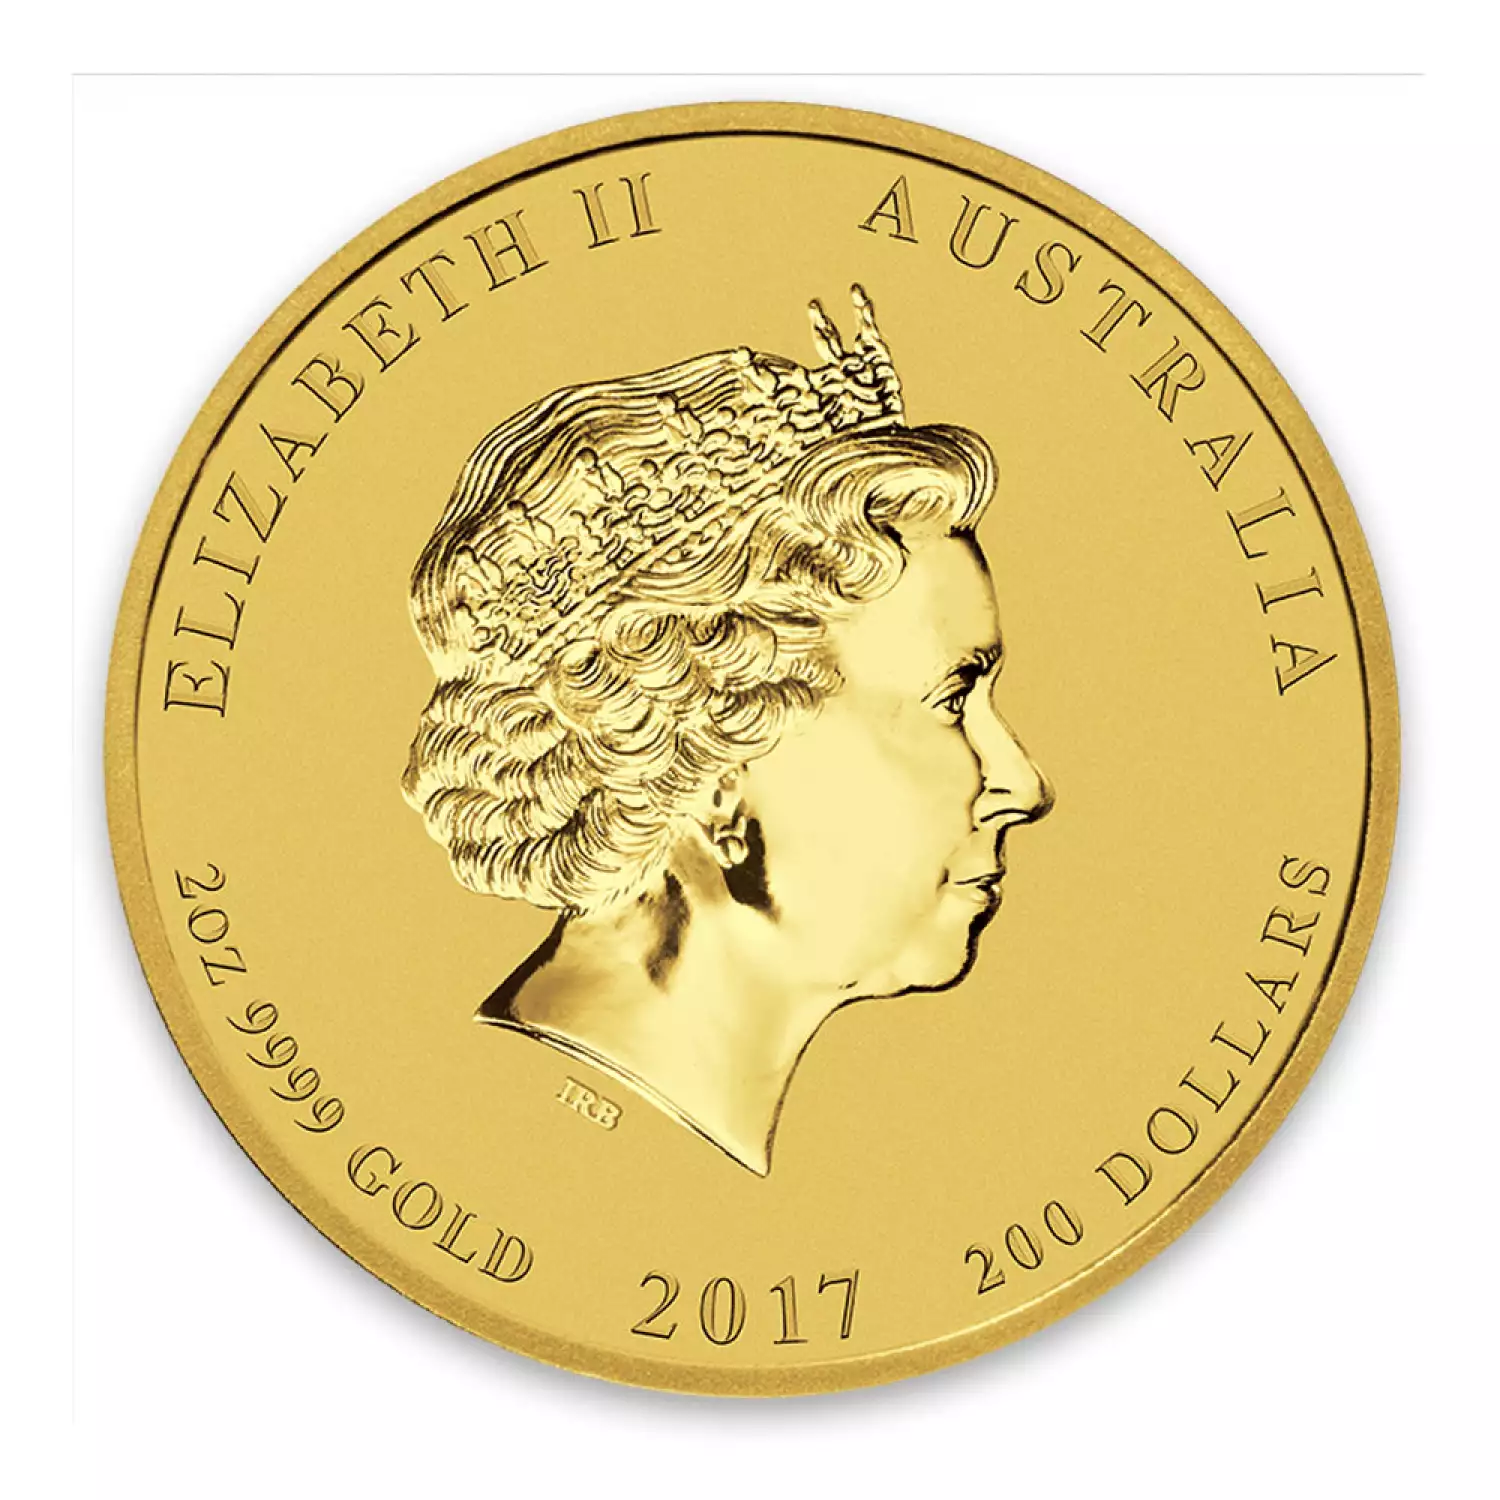 2017 2 oz Australian Perth Mint Gold Lunar II: Year of the Rooster (2)